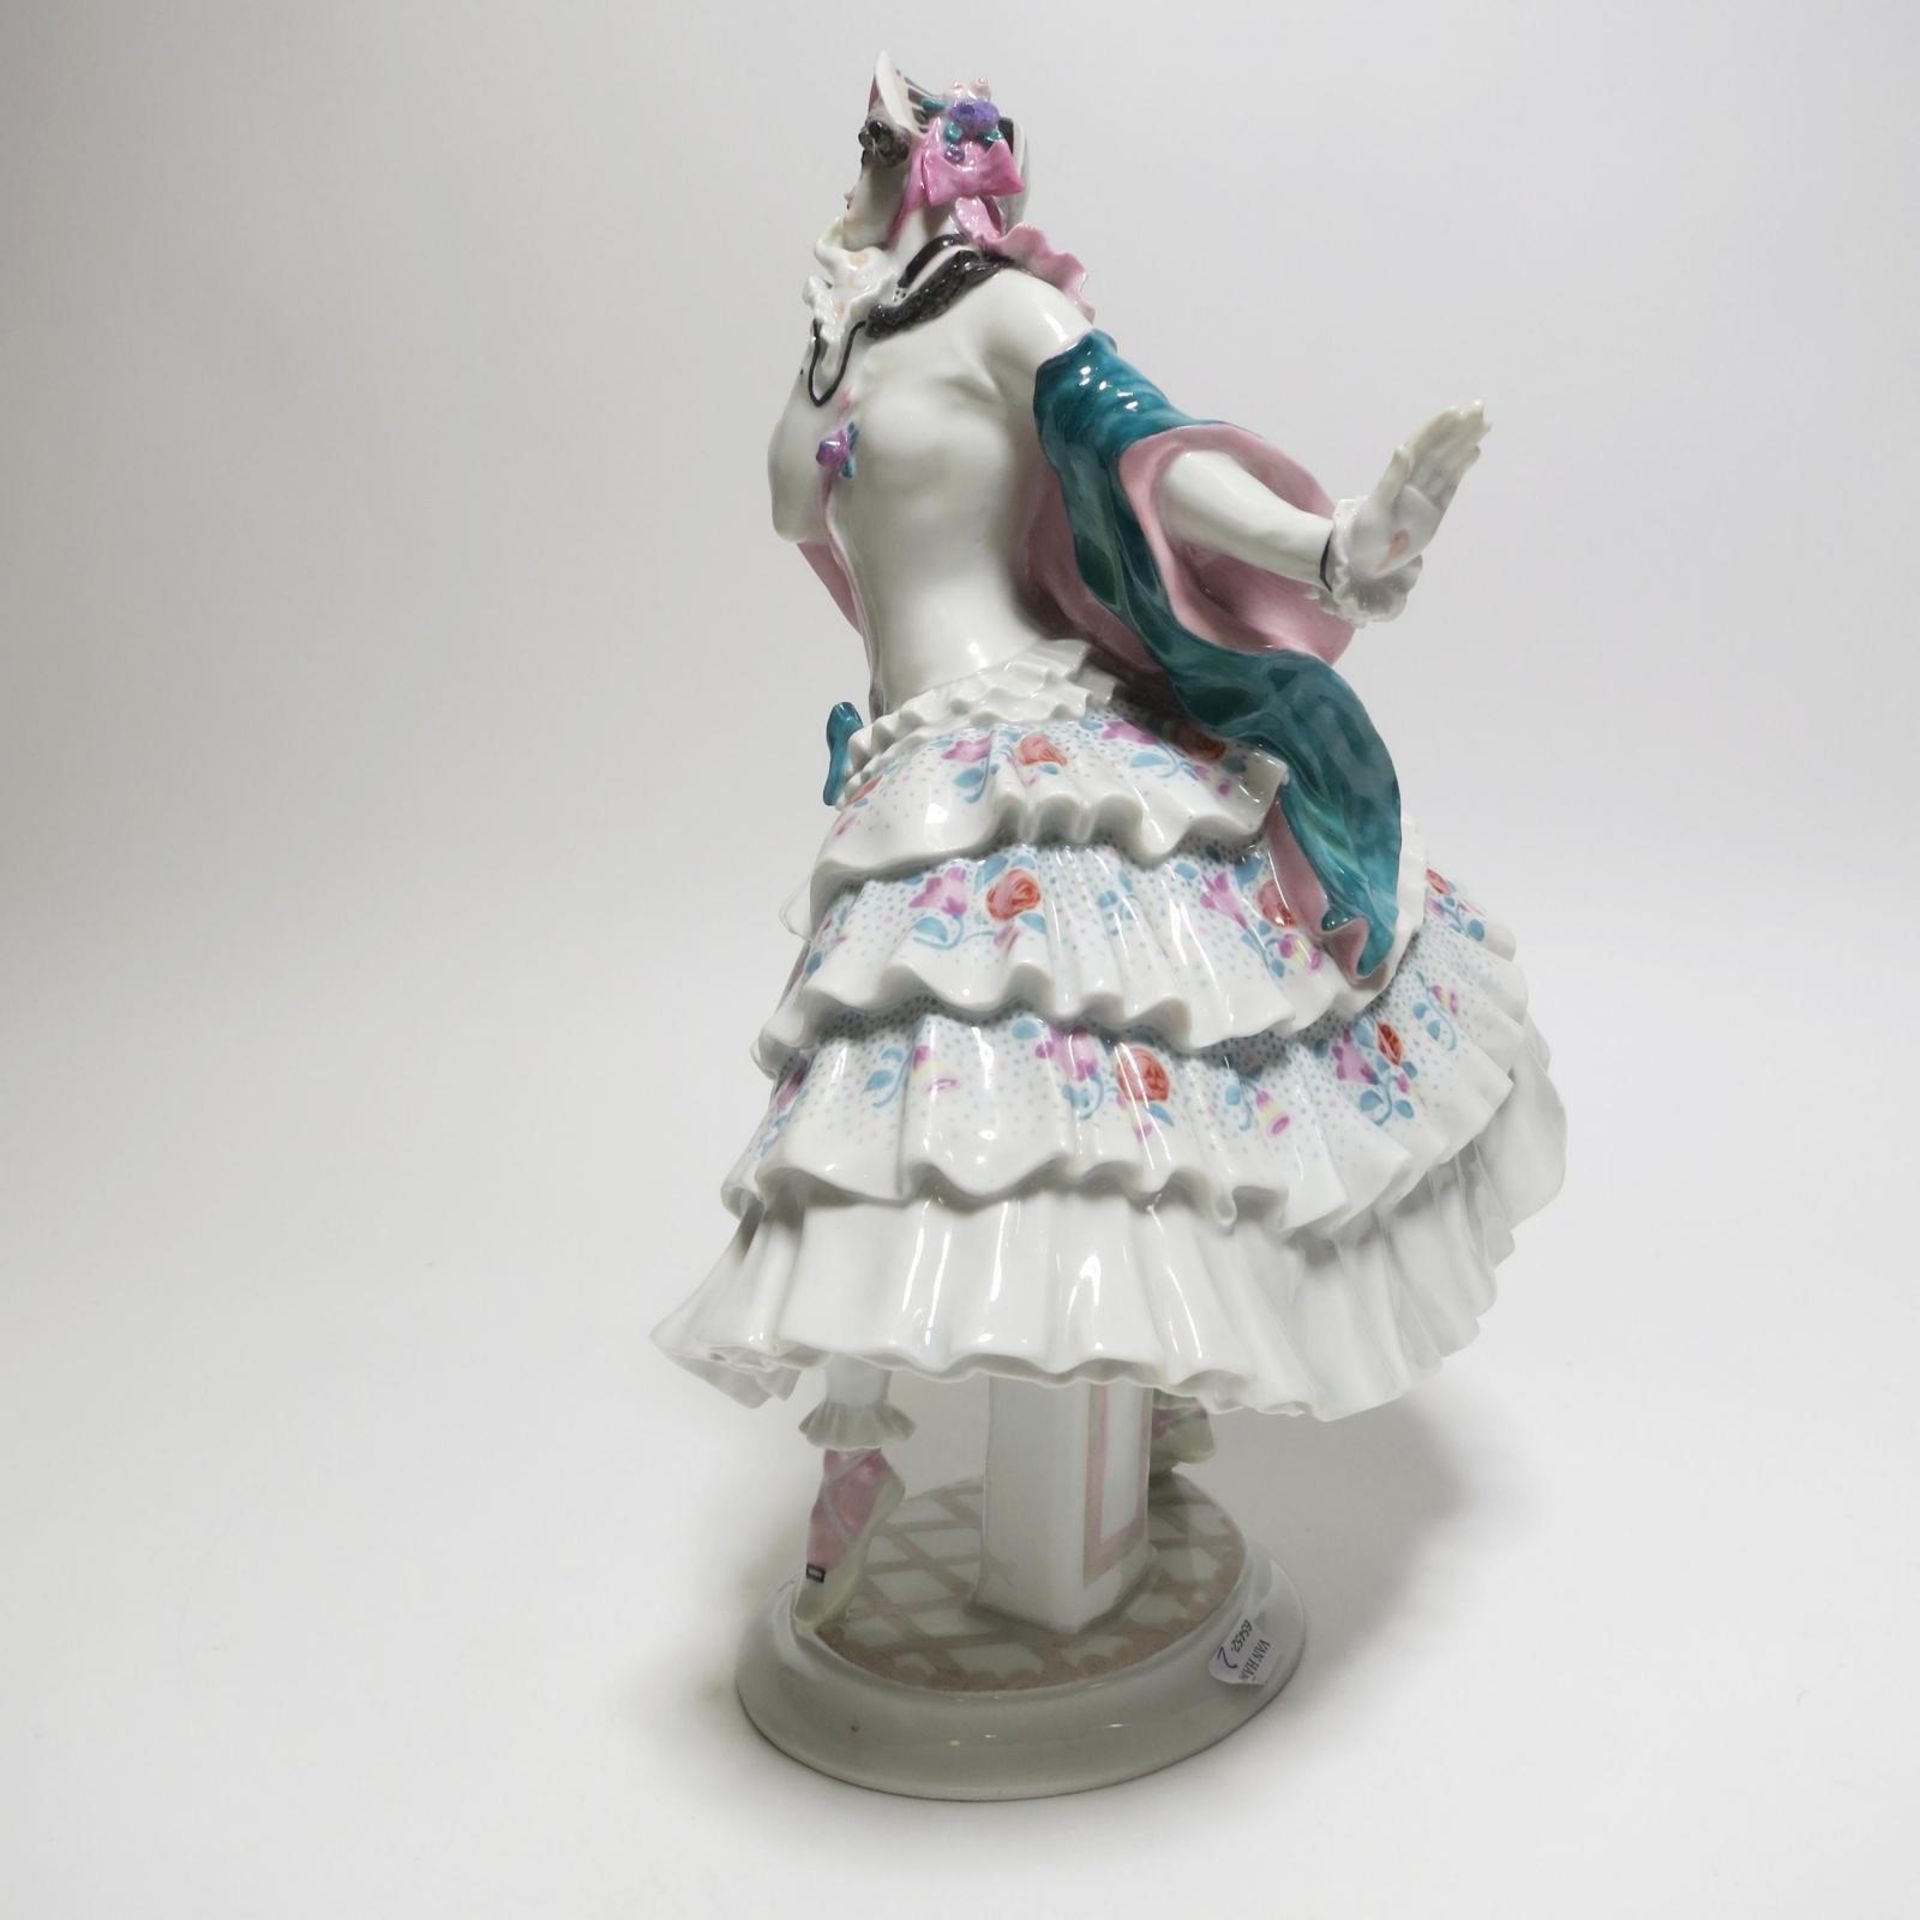 Meissen: PORCELAIN FIGURINES OF THE 'RUSSIAN BALLET' - Image 24 of 49